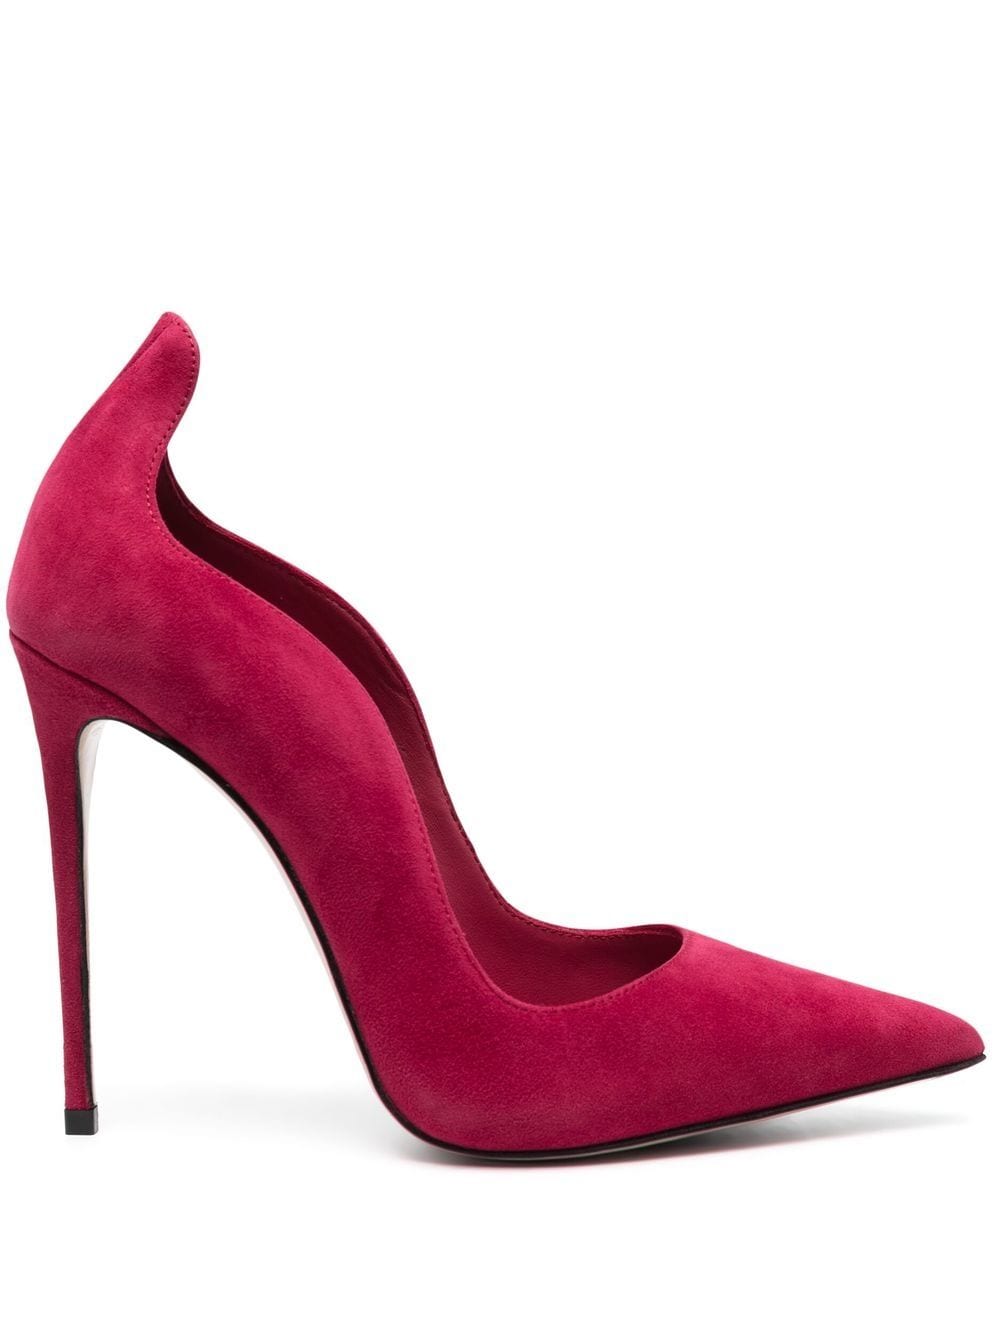 Le Silla Ivy 120mm Suede Pumps In Pink